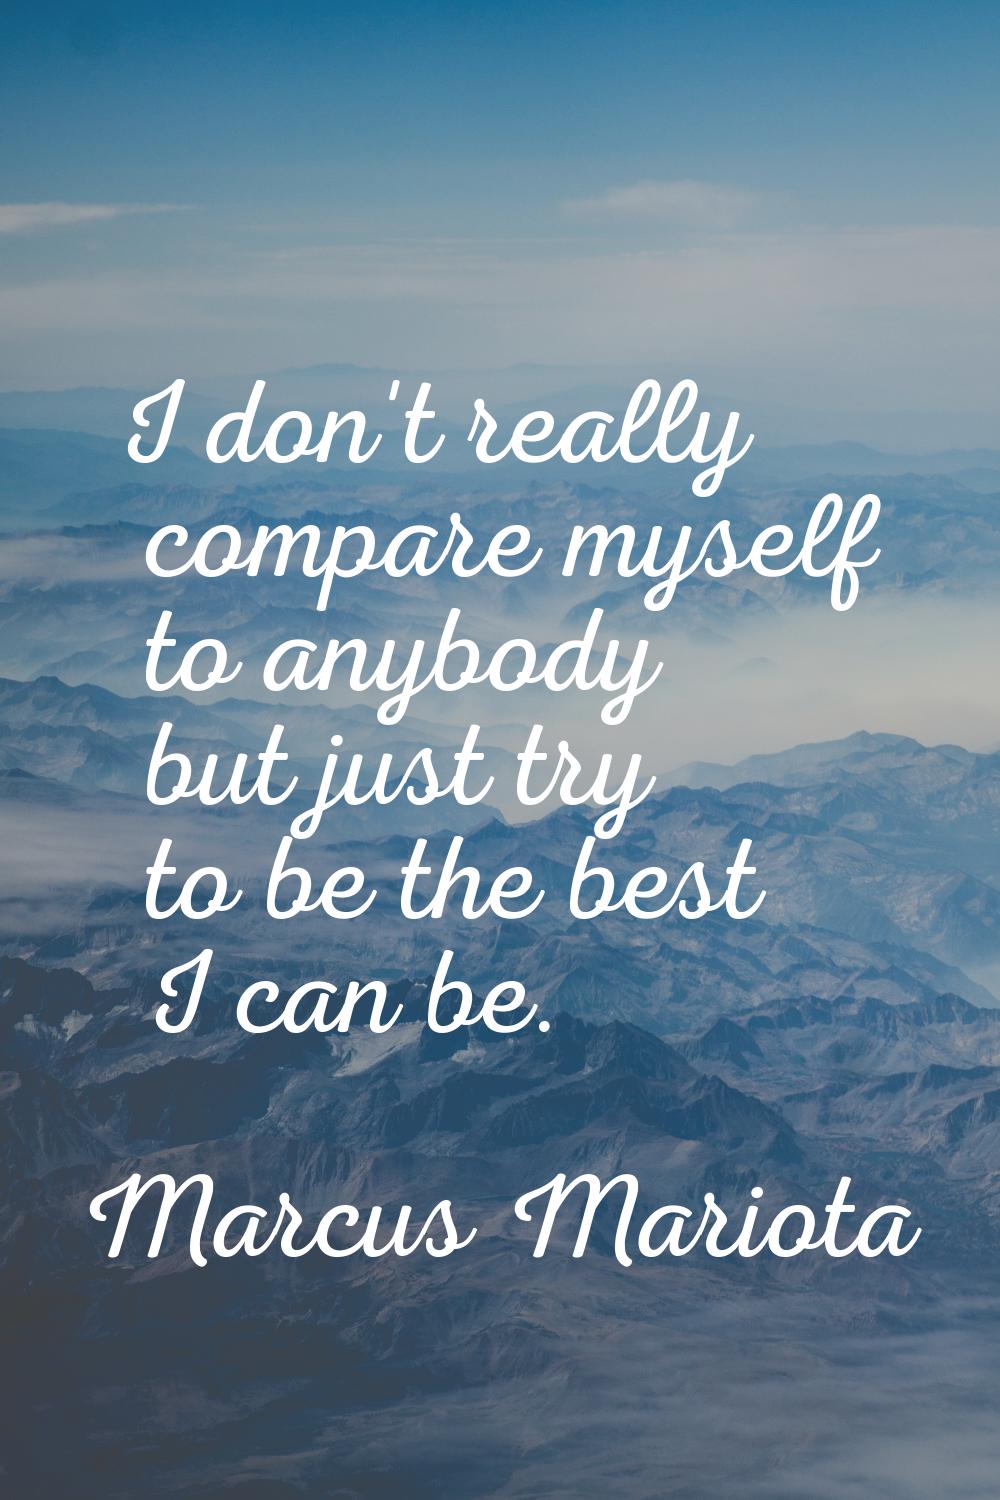 I don't really compare myself to anybody but just try to be the best I can be.